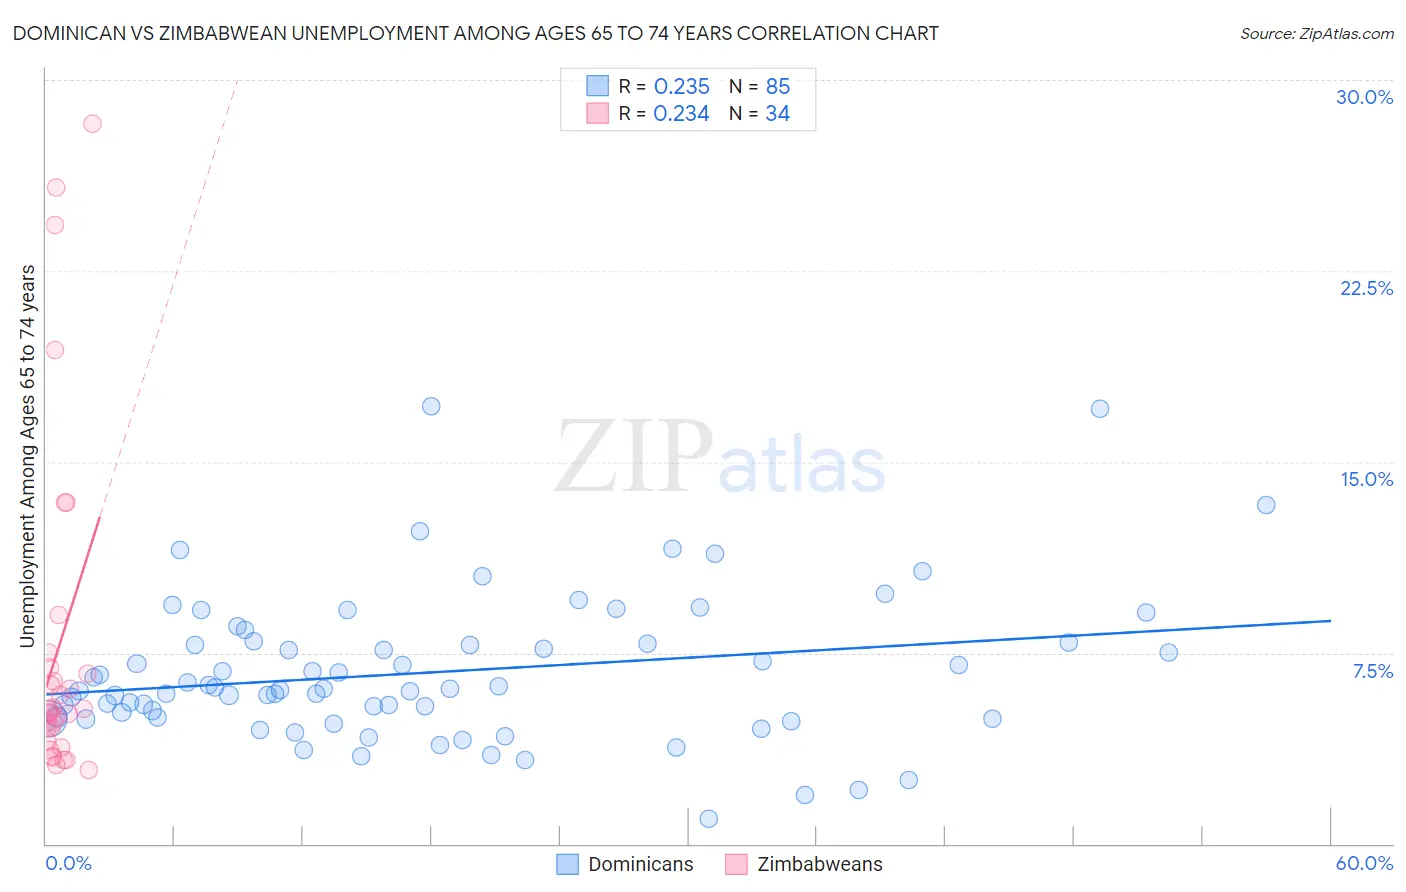 Dominican vs Zimbabwean Unemployment Among Ages 65 to 74 years